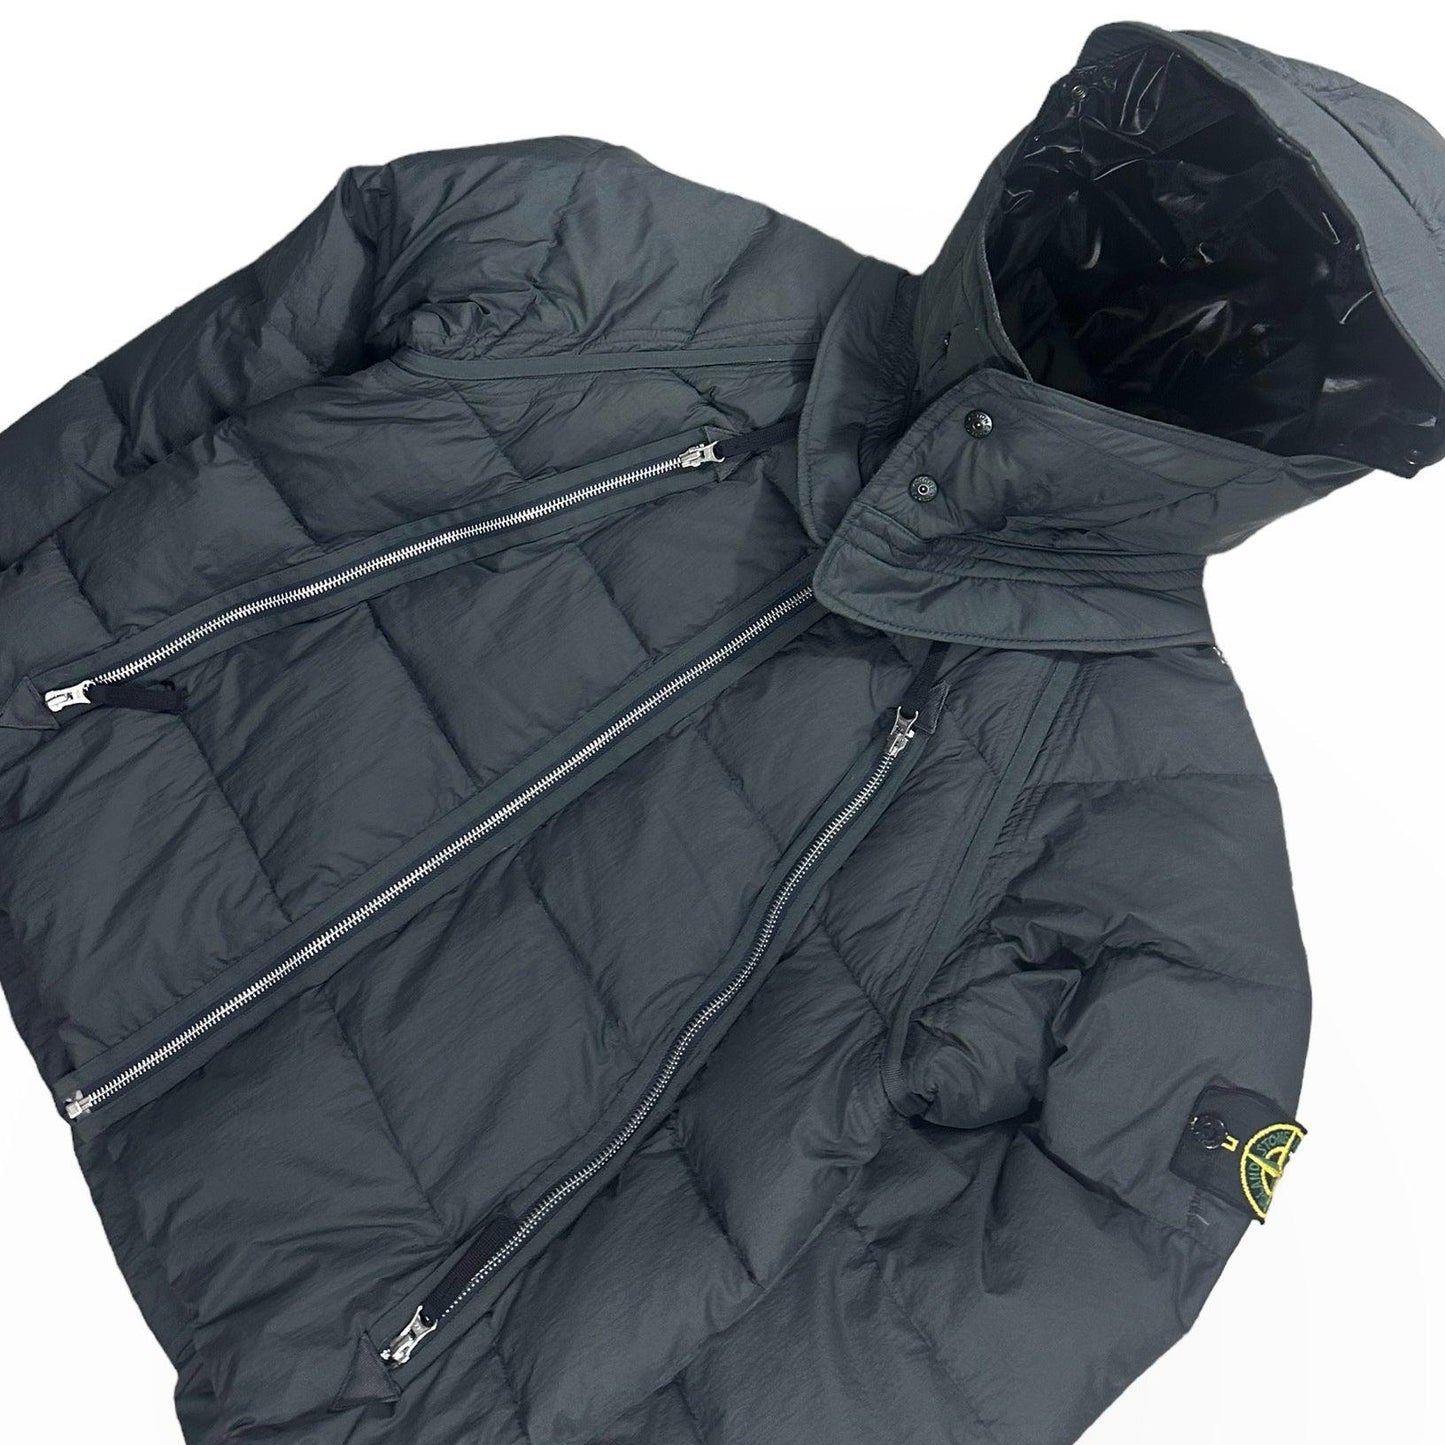 Stone Island Asymmetrical Zip Nylon Tela Down Jacket with Mesh Badge from A/W 2010 - Known Source